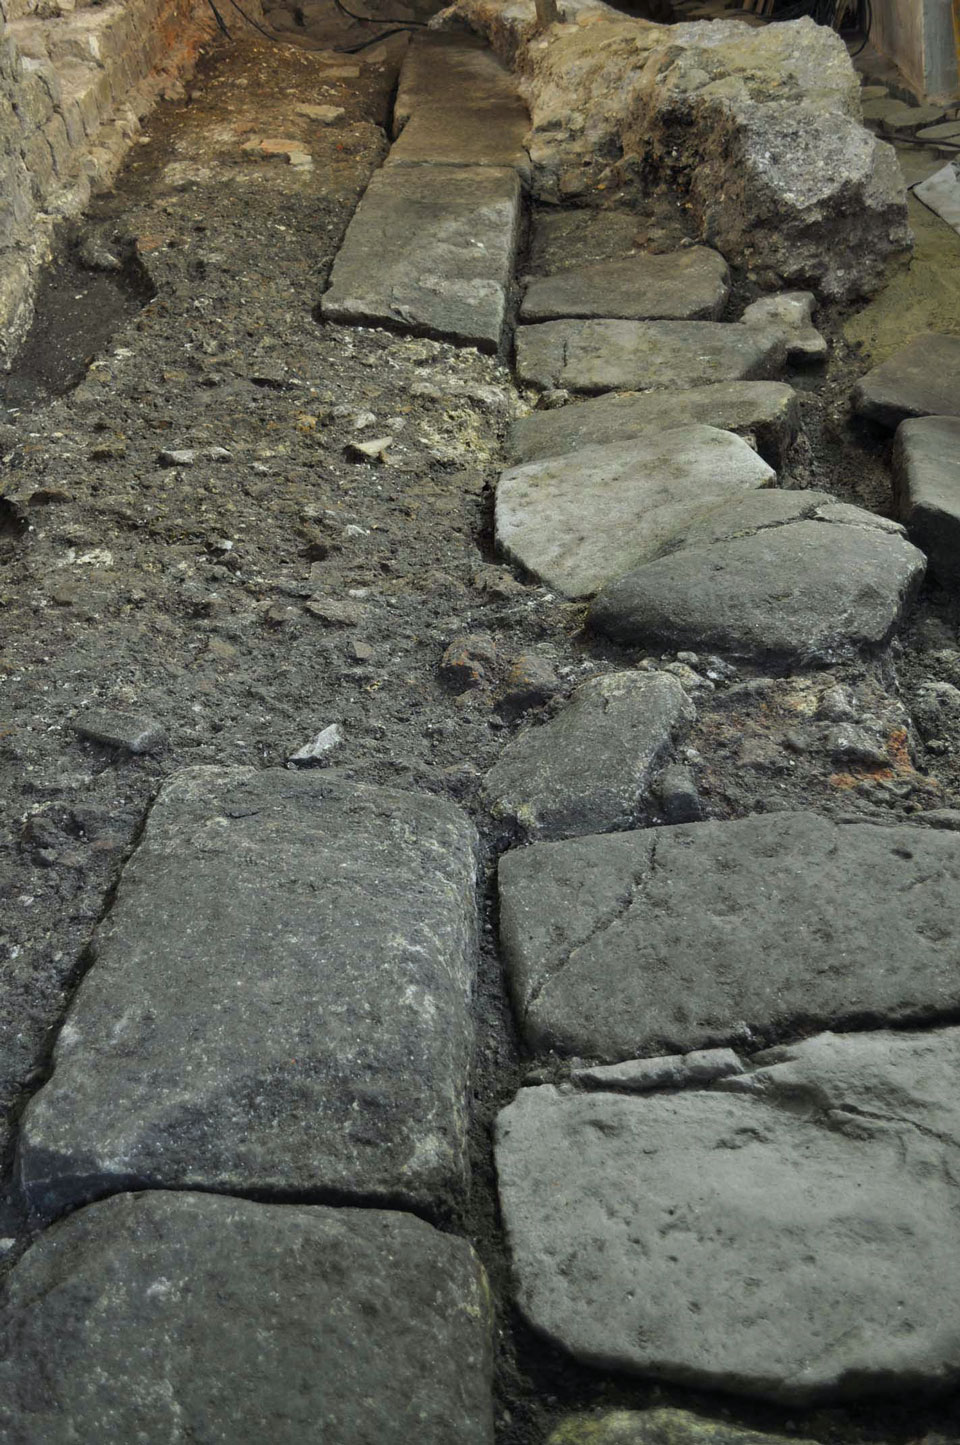 A section of the roman road and pavement (Archive of the Veneto Regional Board for Archeological Heritage)